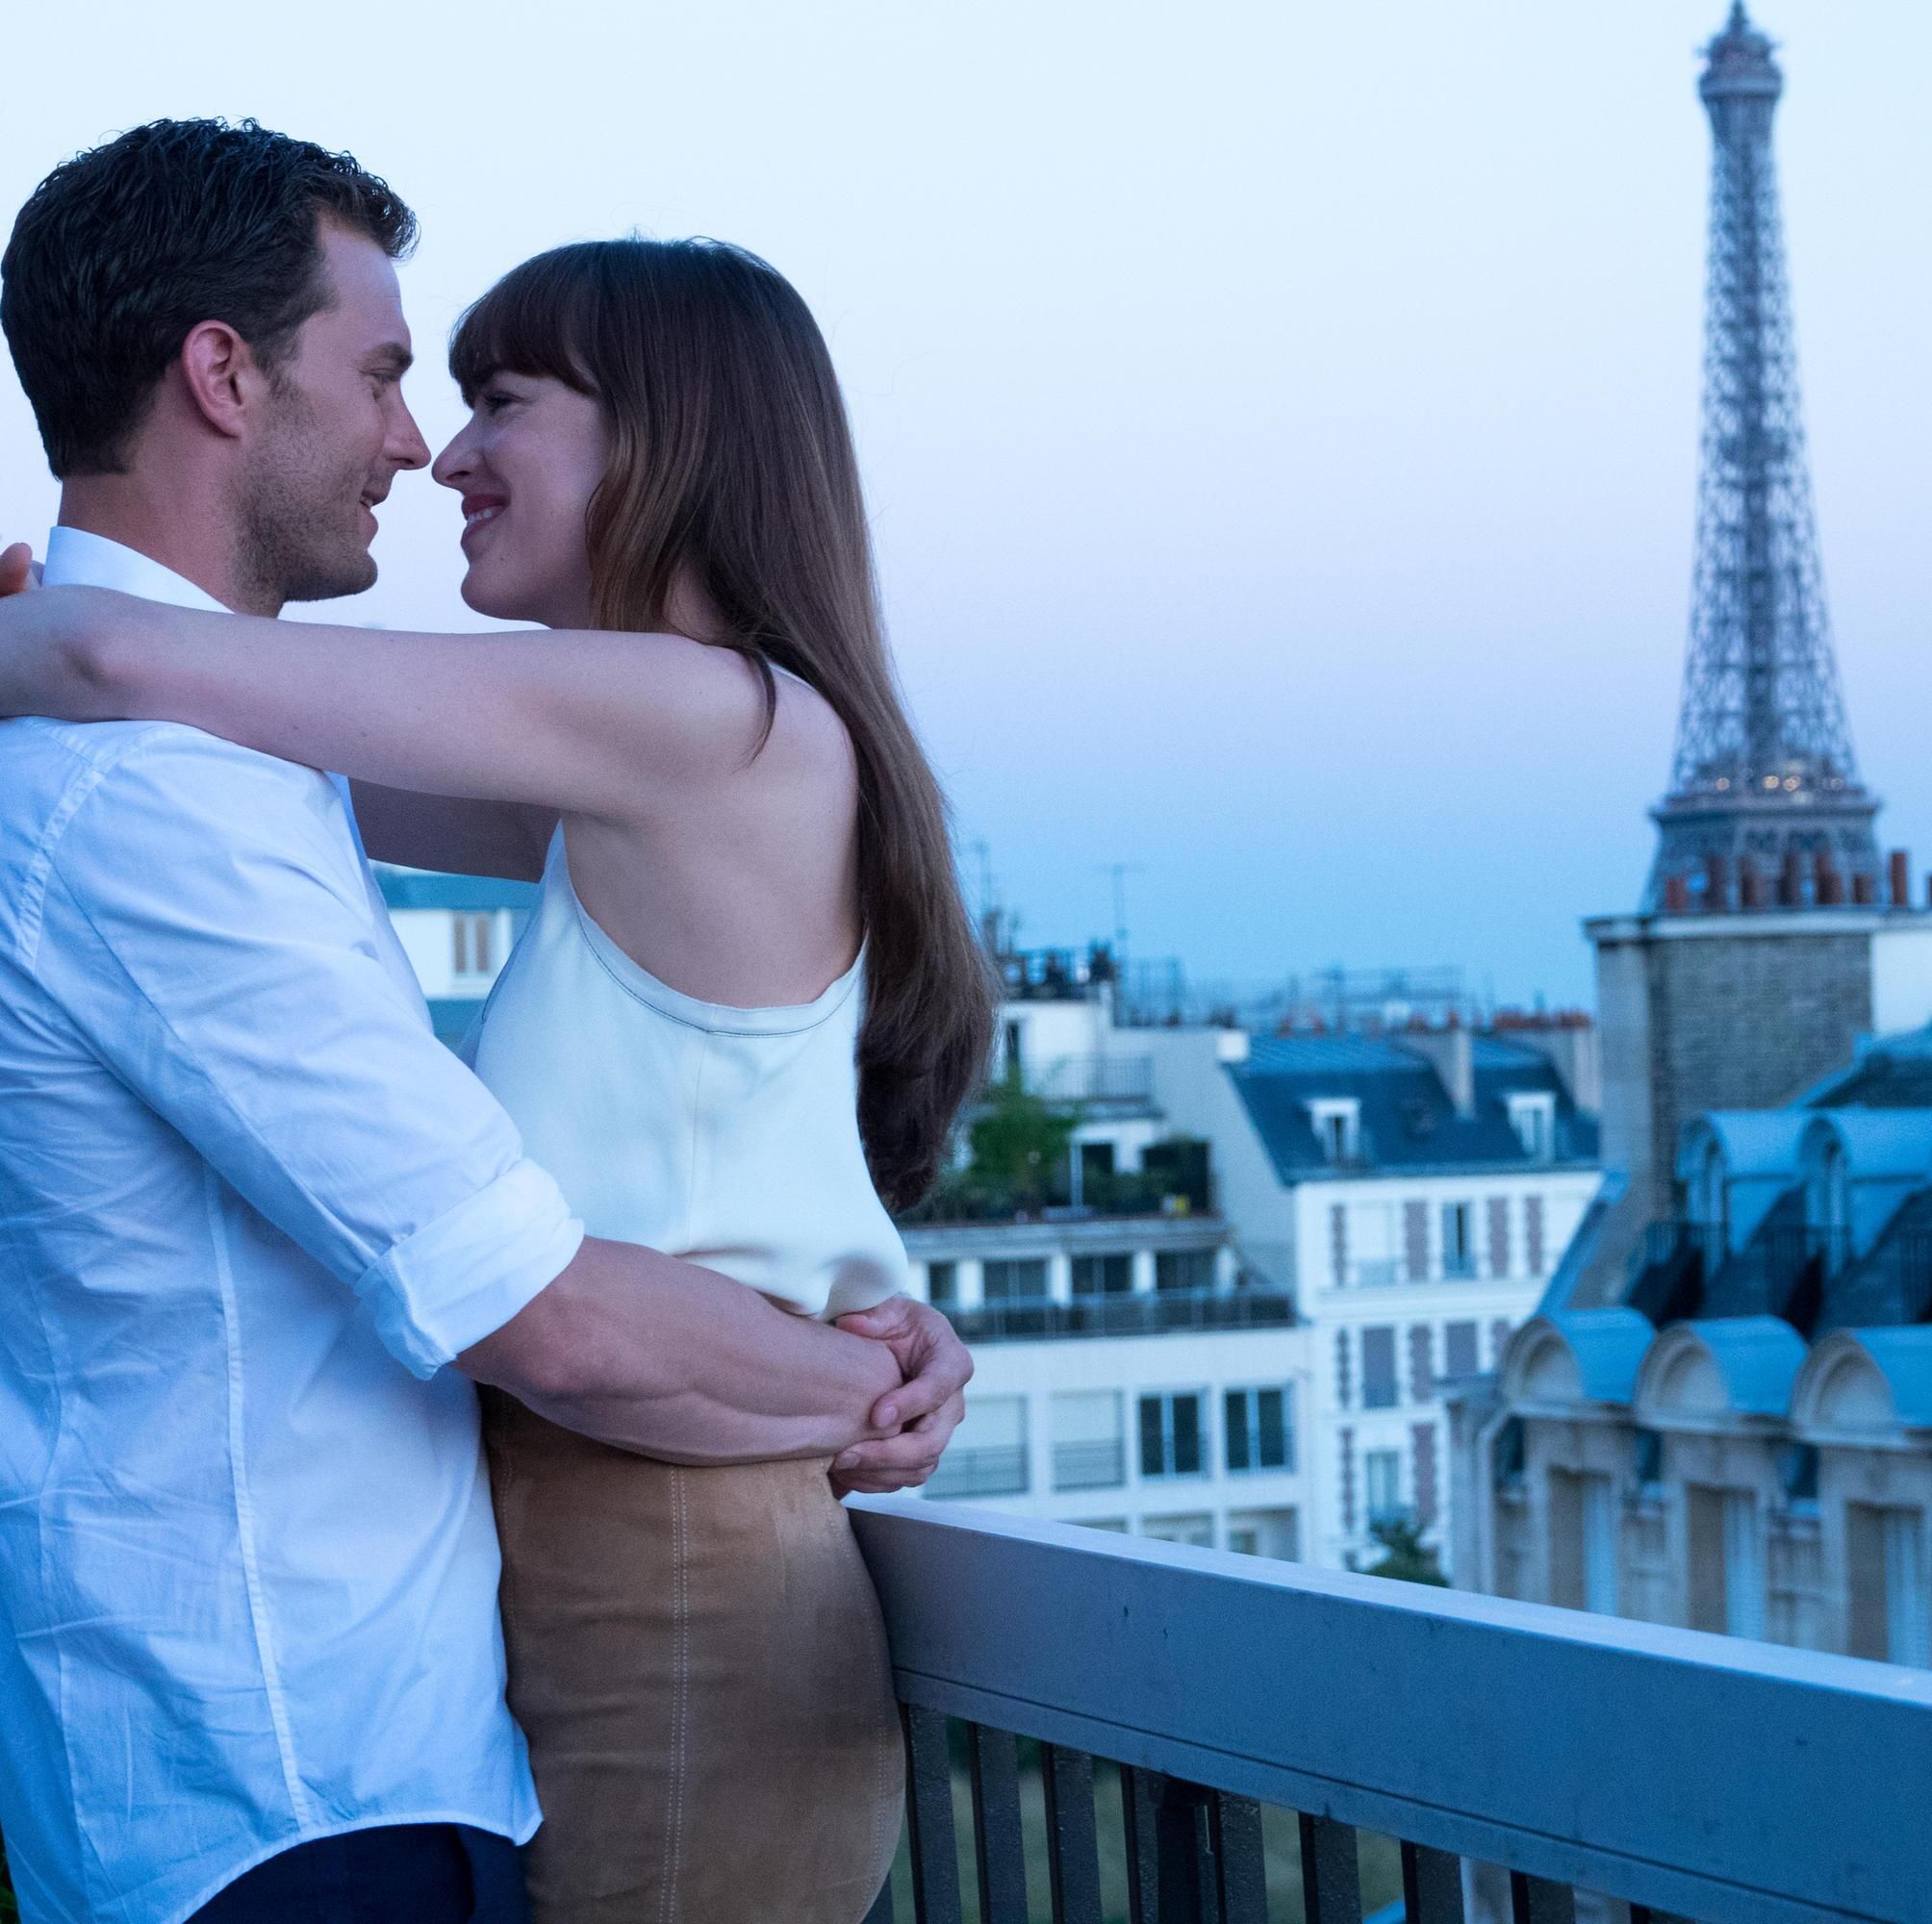 fifty shades freed quotes